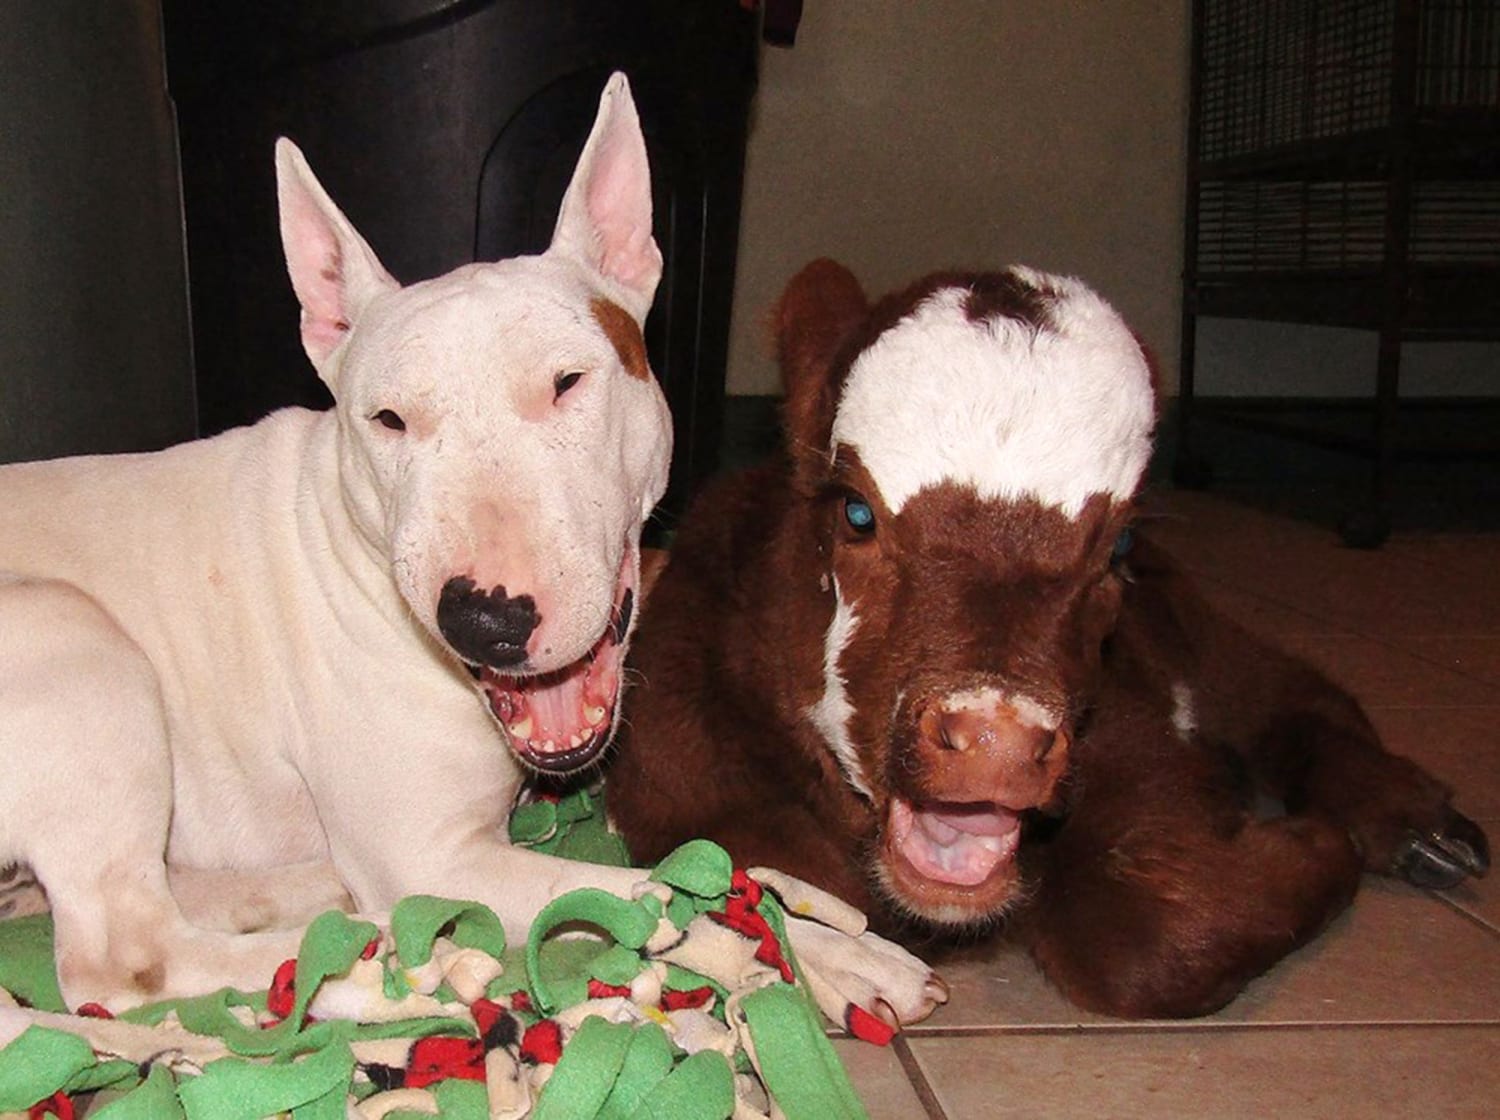 Rescued mini cow is living in paradise with her best friends – dogs!